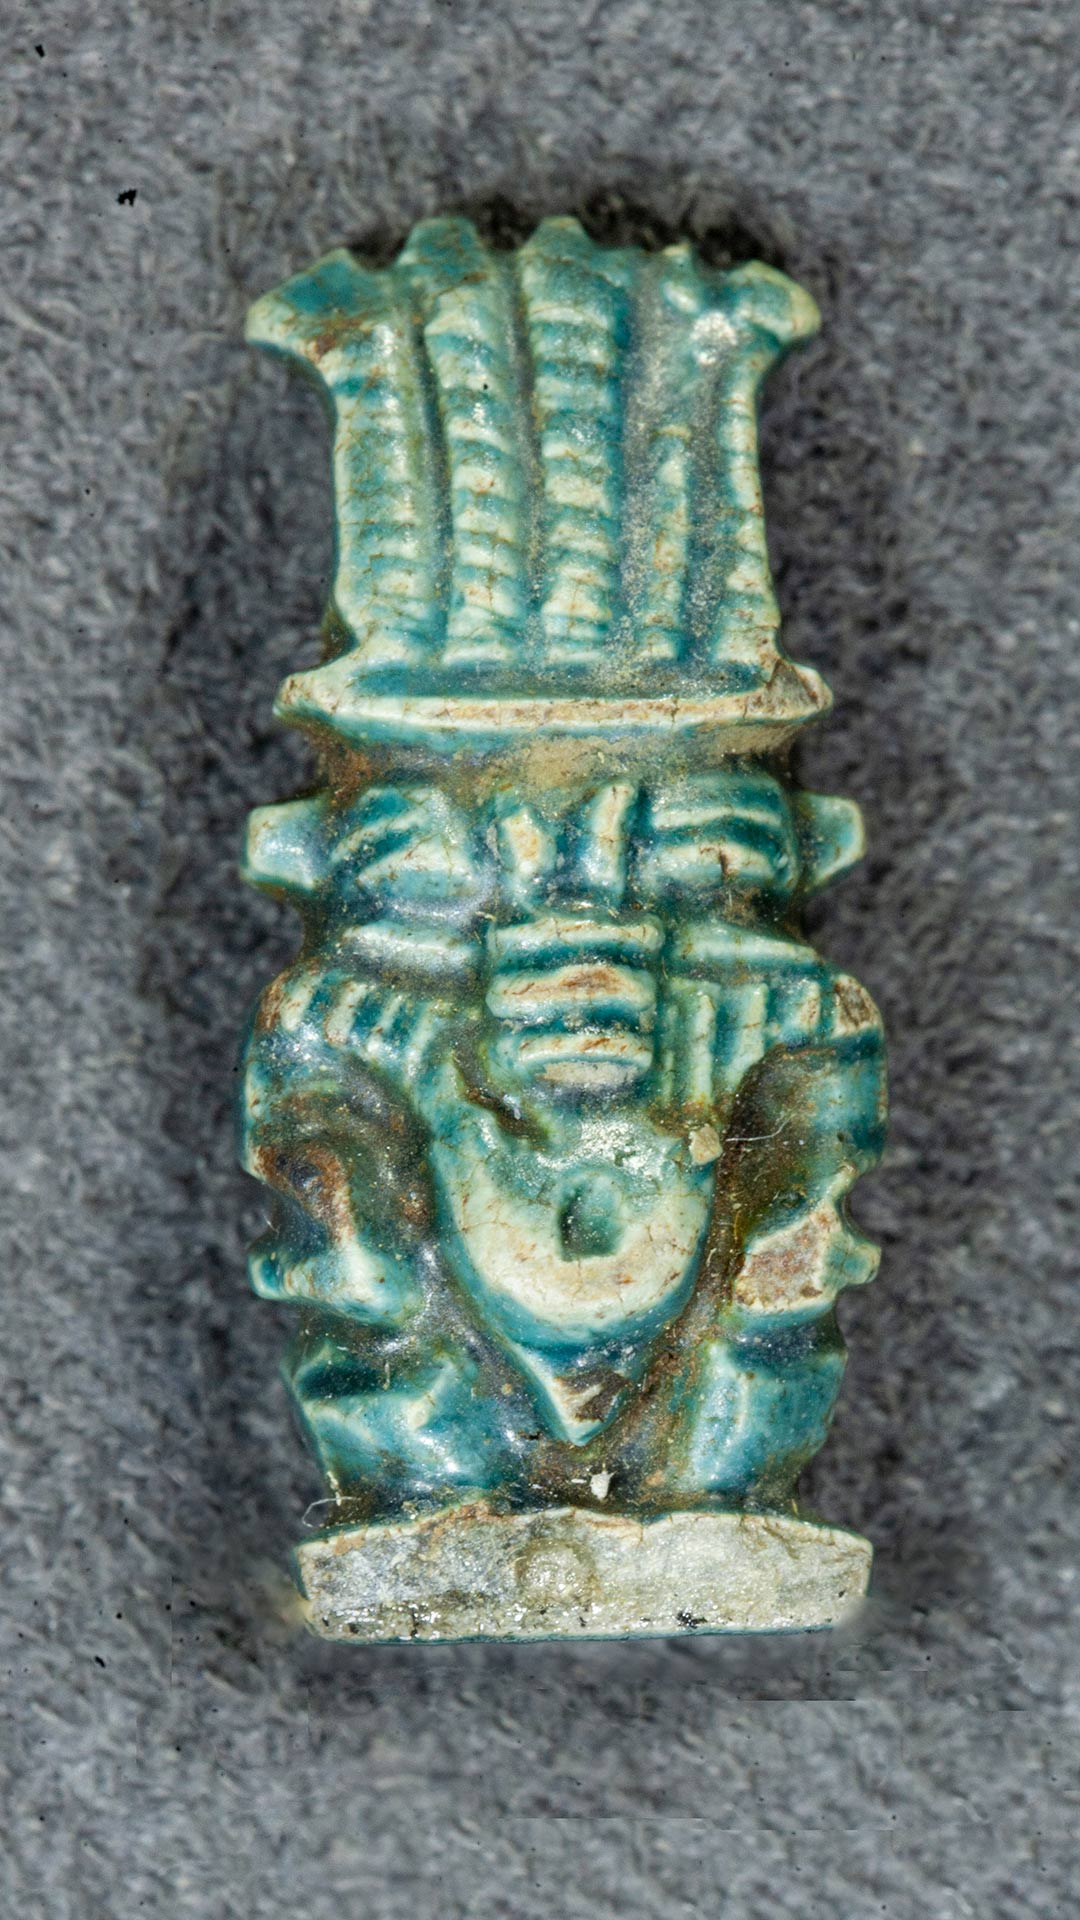 figurine of God Bes, the figurine shows the short stature of Bes and he is wearing an ostrich feather headress